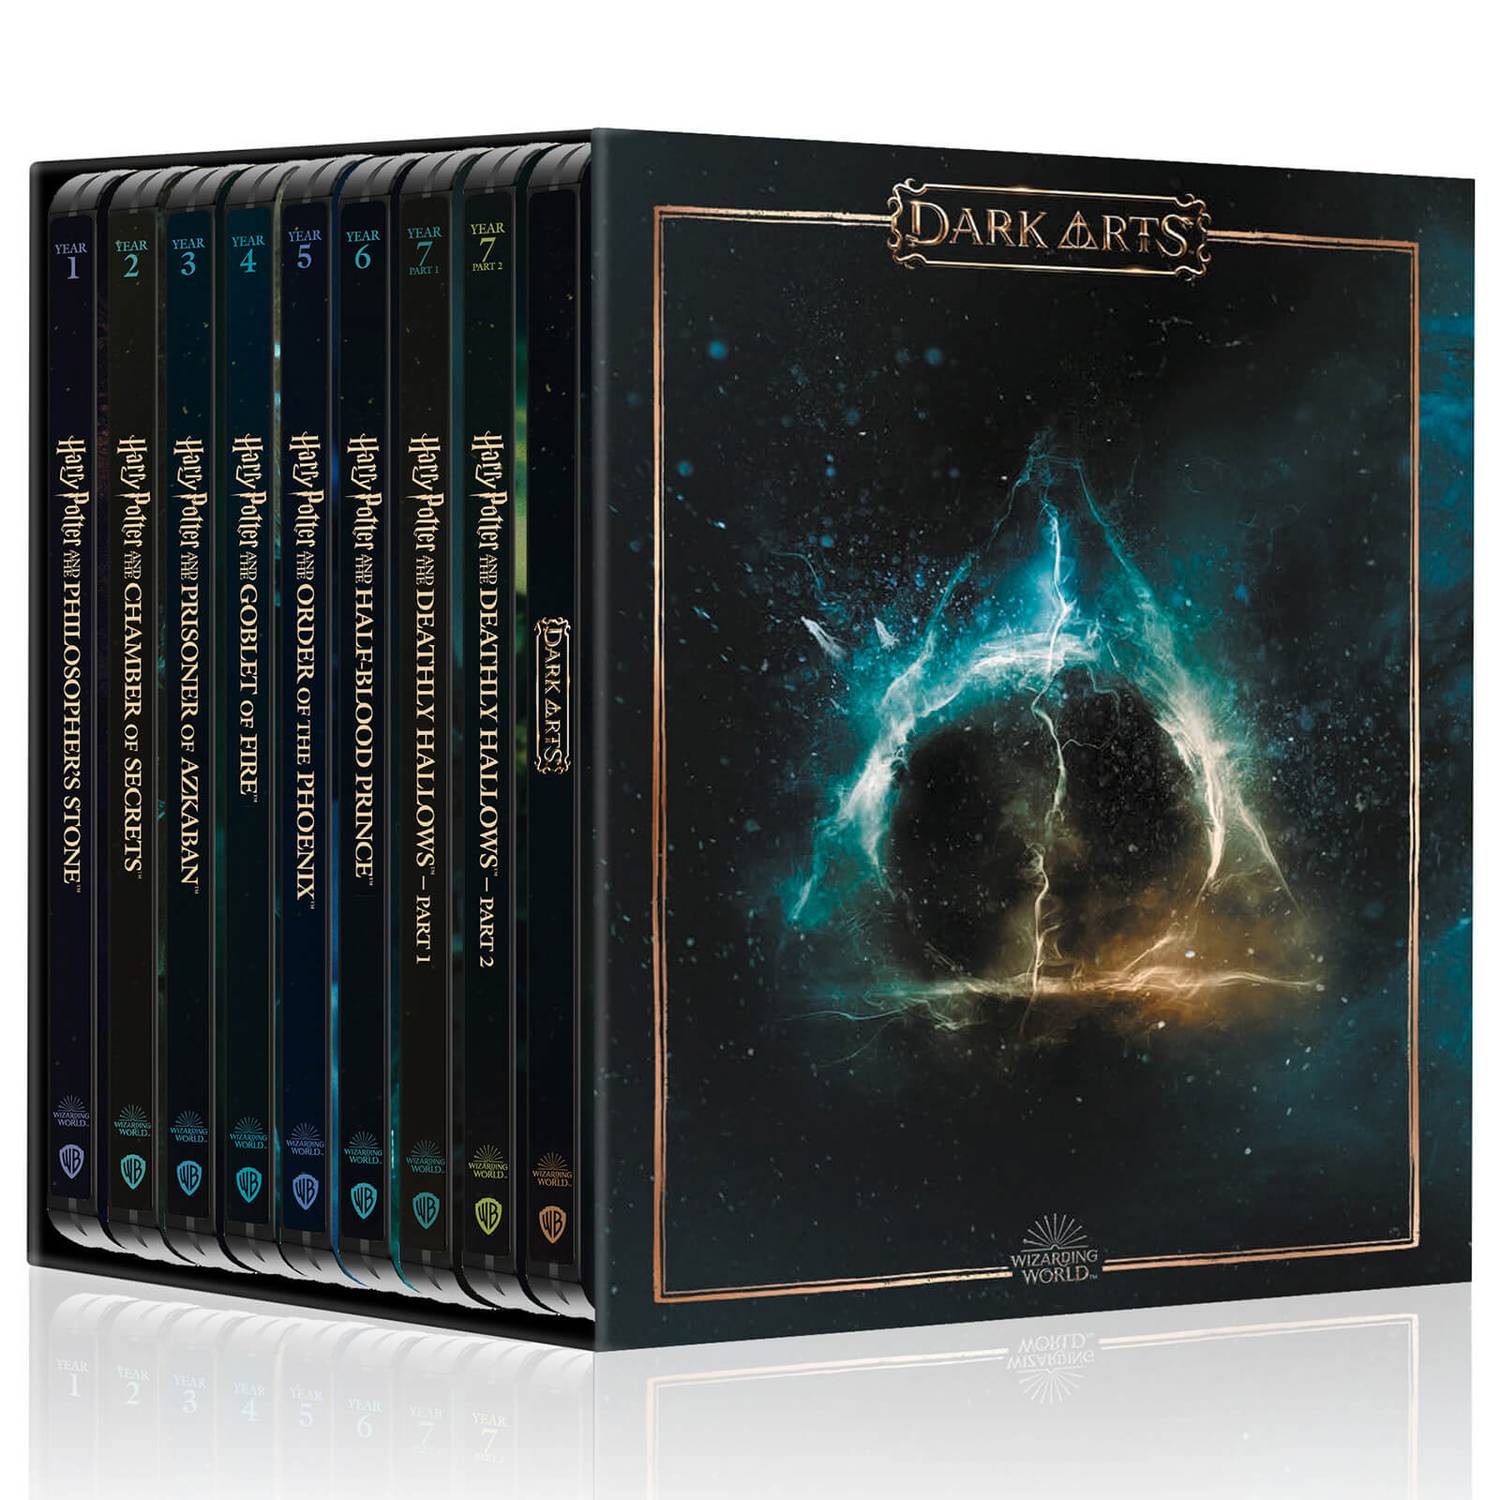 Harry Potter: The Complete Collection (4K UHD Blu-ray) Dark Arts Edition  Steelbook Collection – Bluraymania